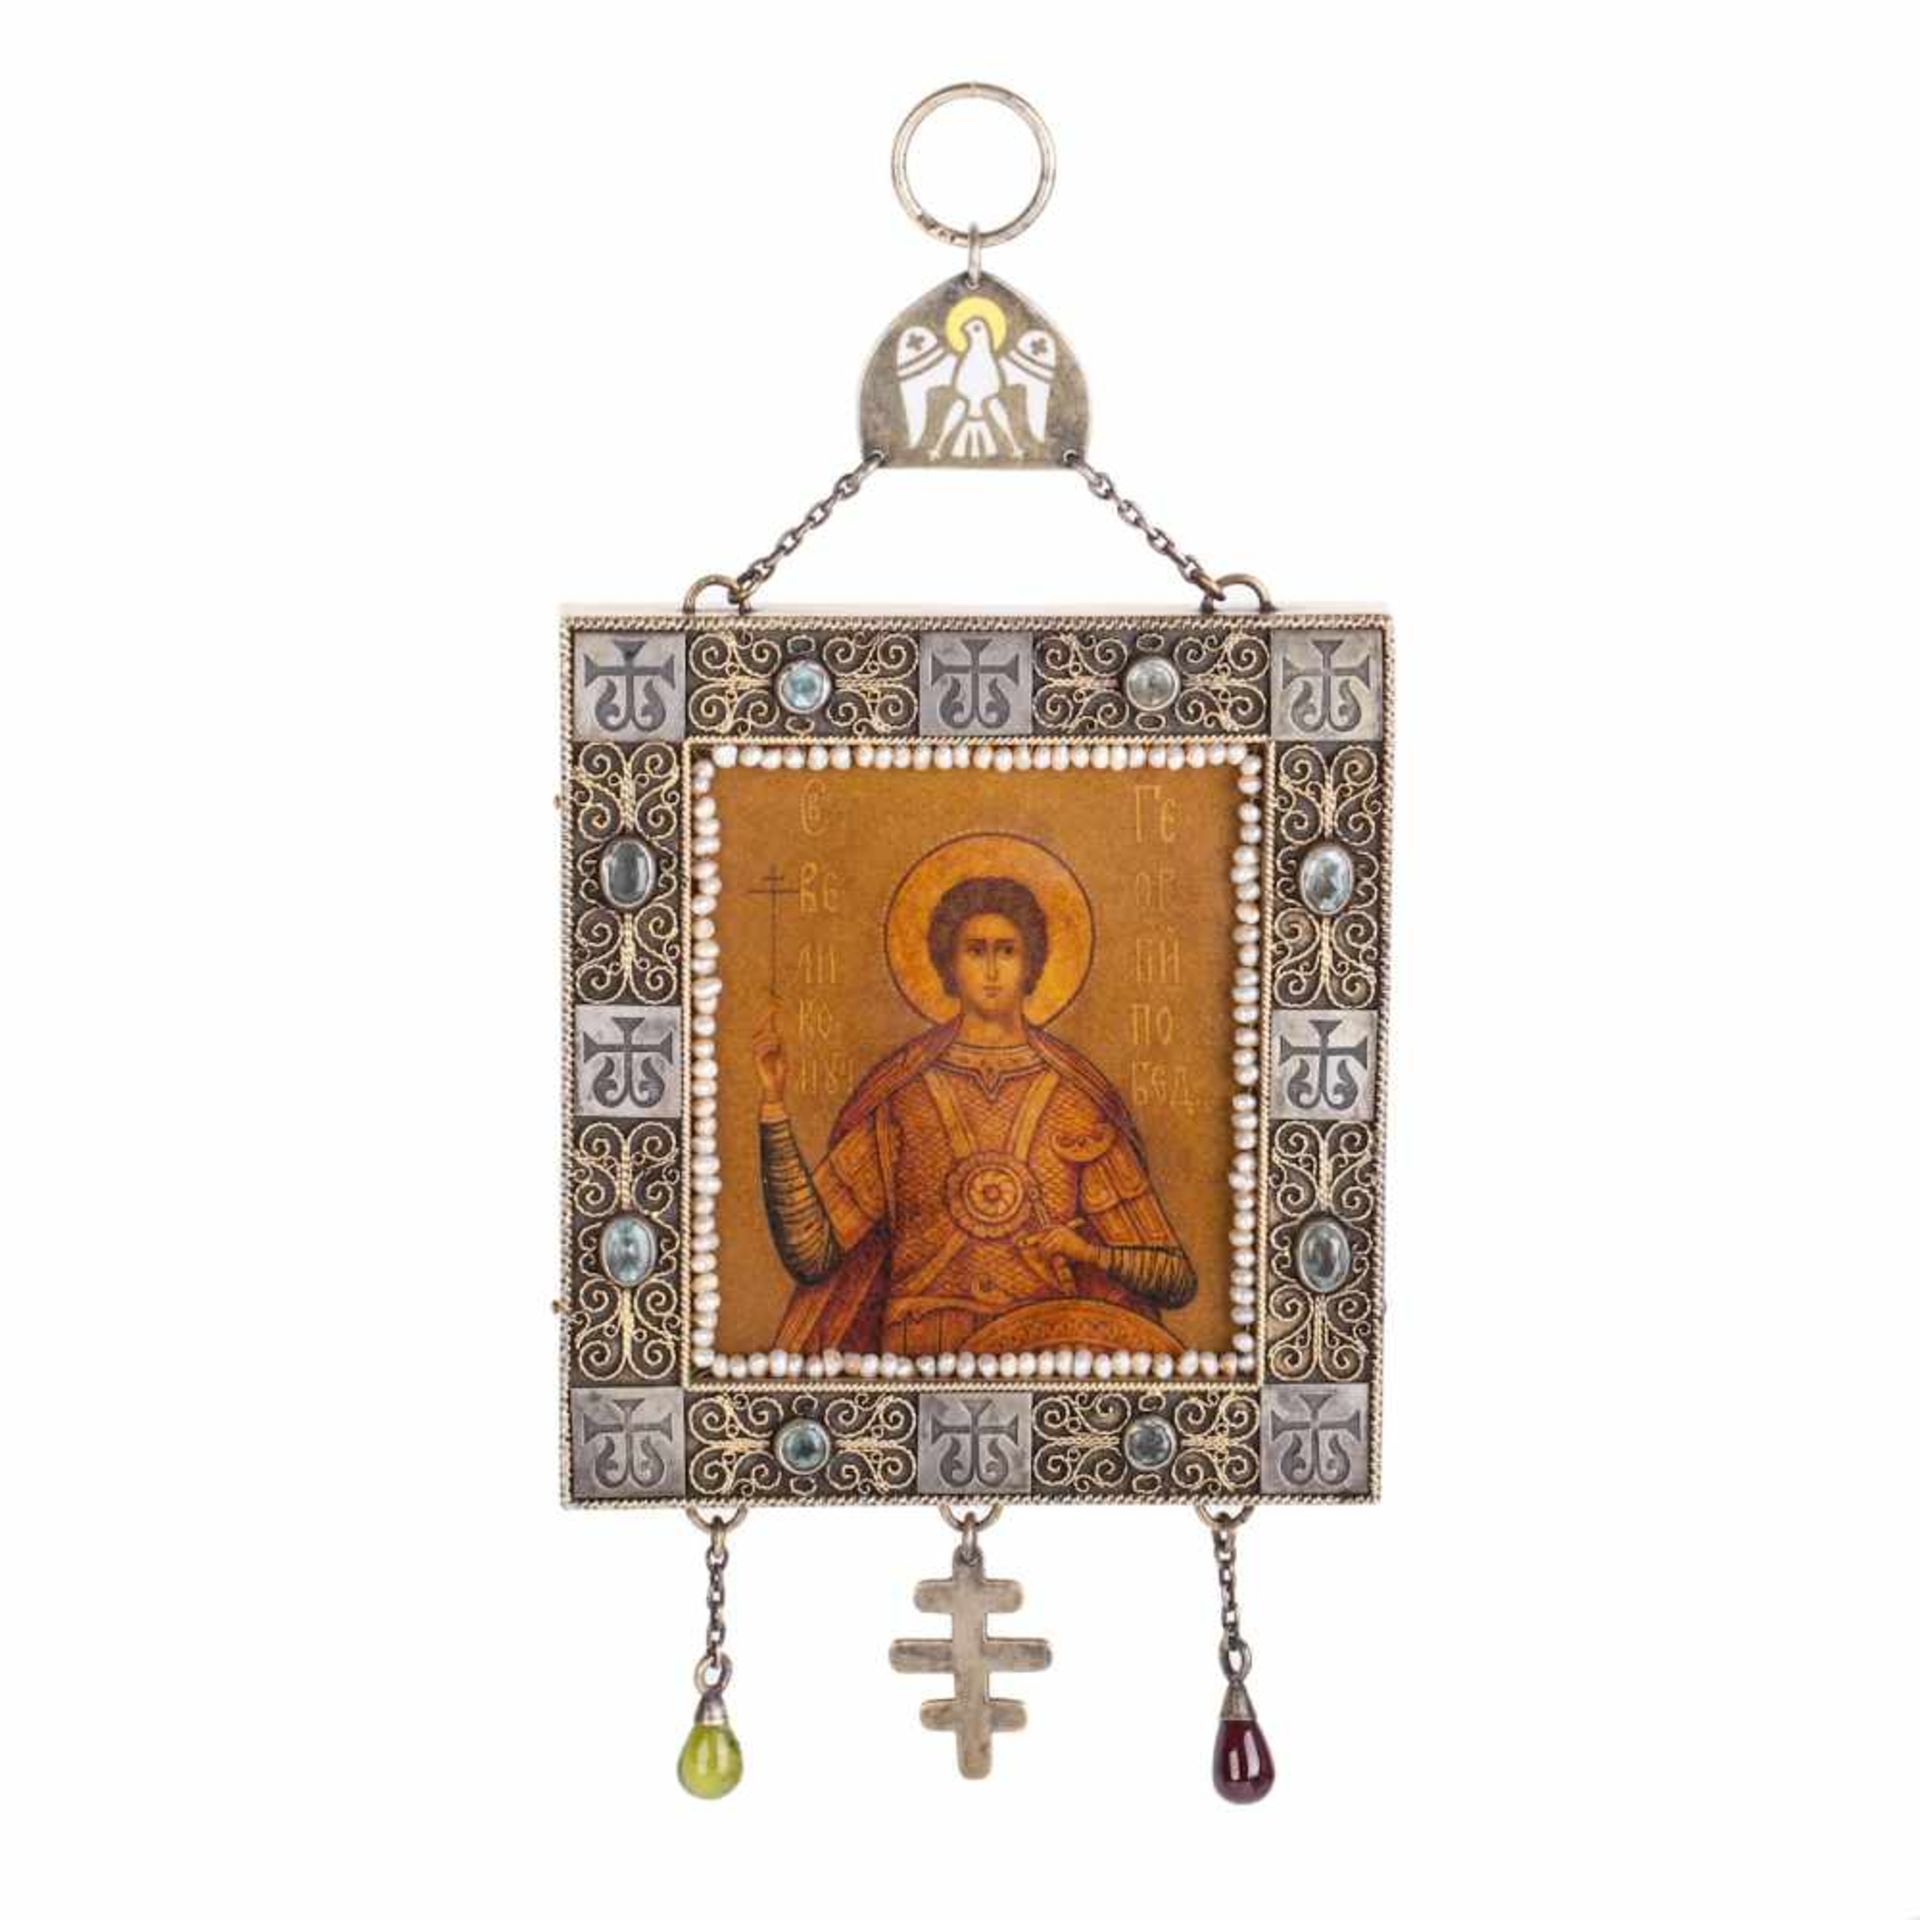 Very Rare travel icon of Saint GeorgeVery Rare Russian Art Nouveau silver, filigree, enamel, and gem